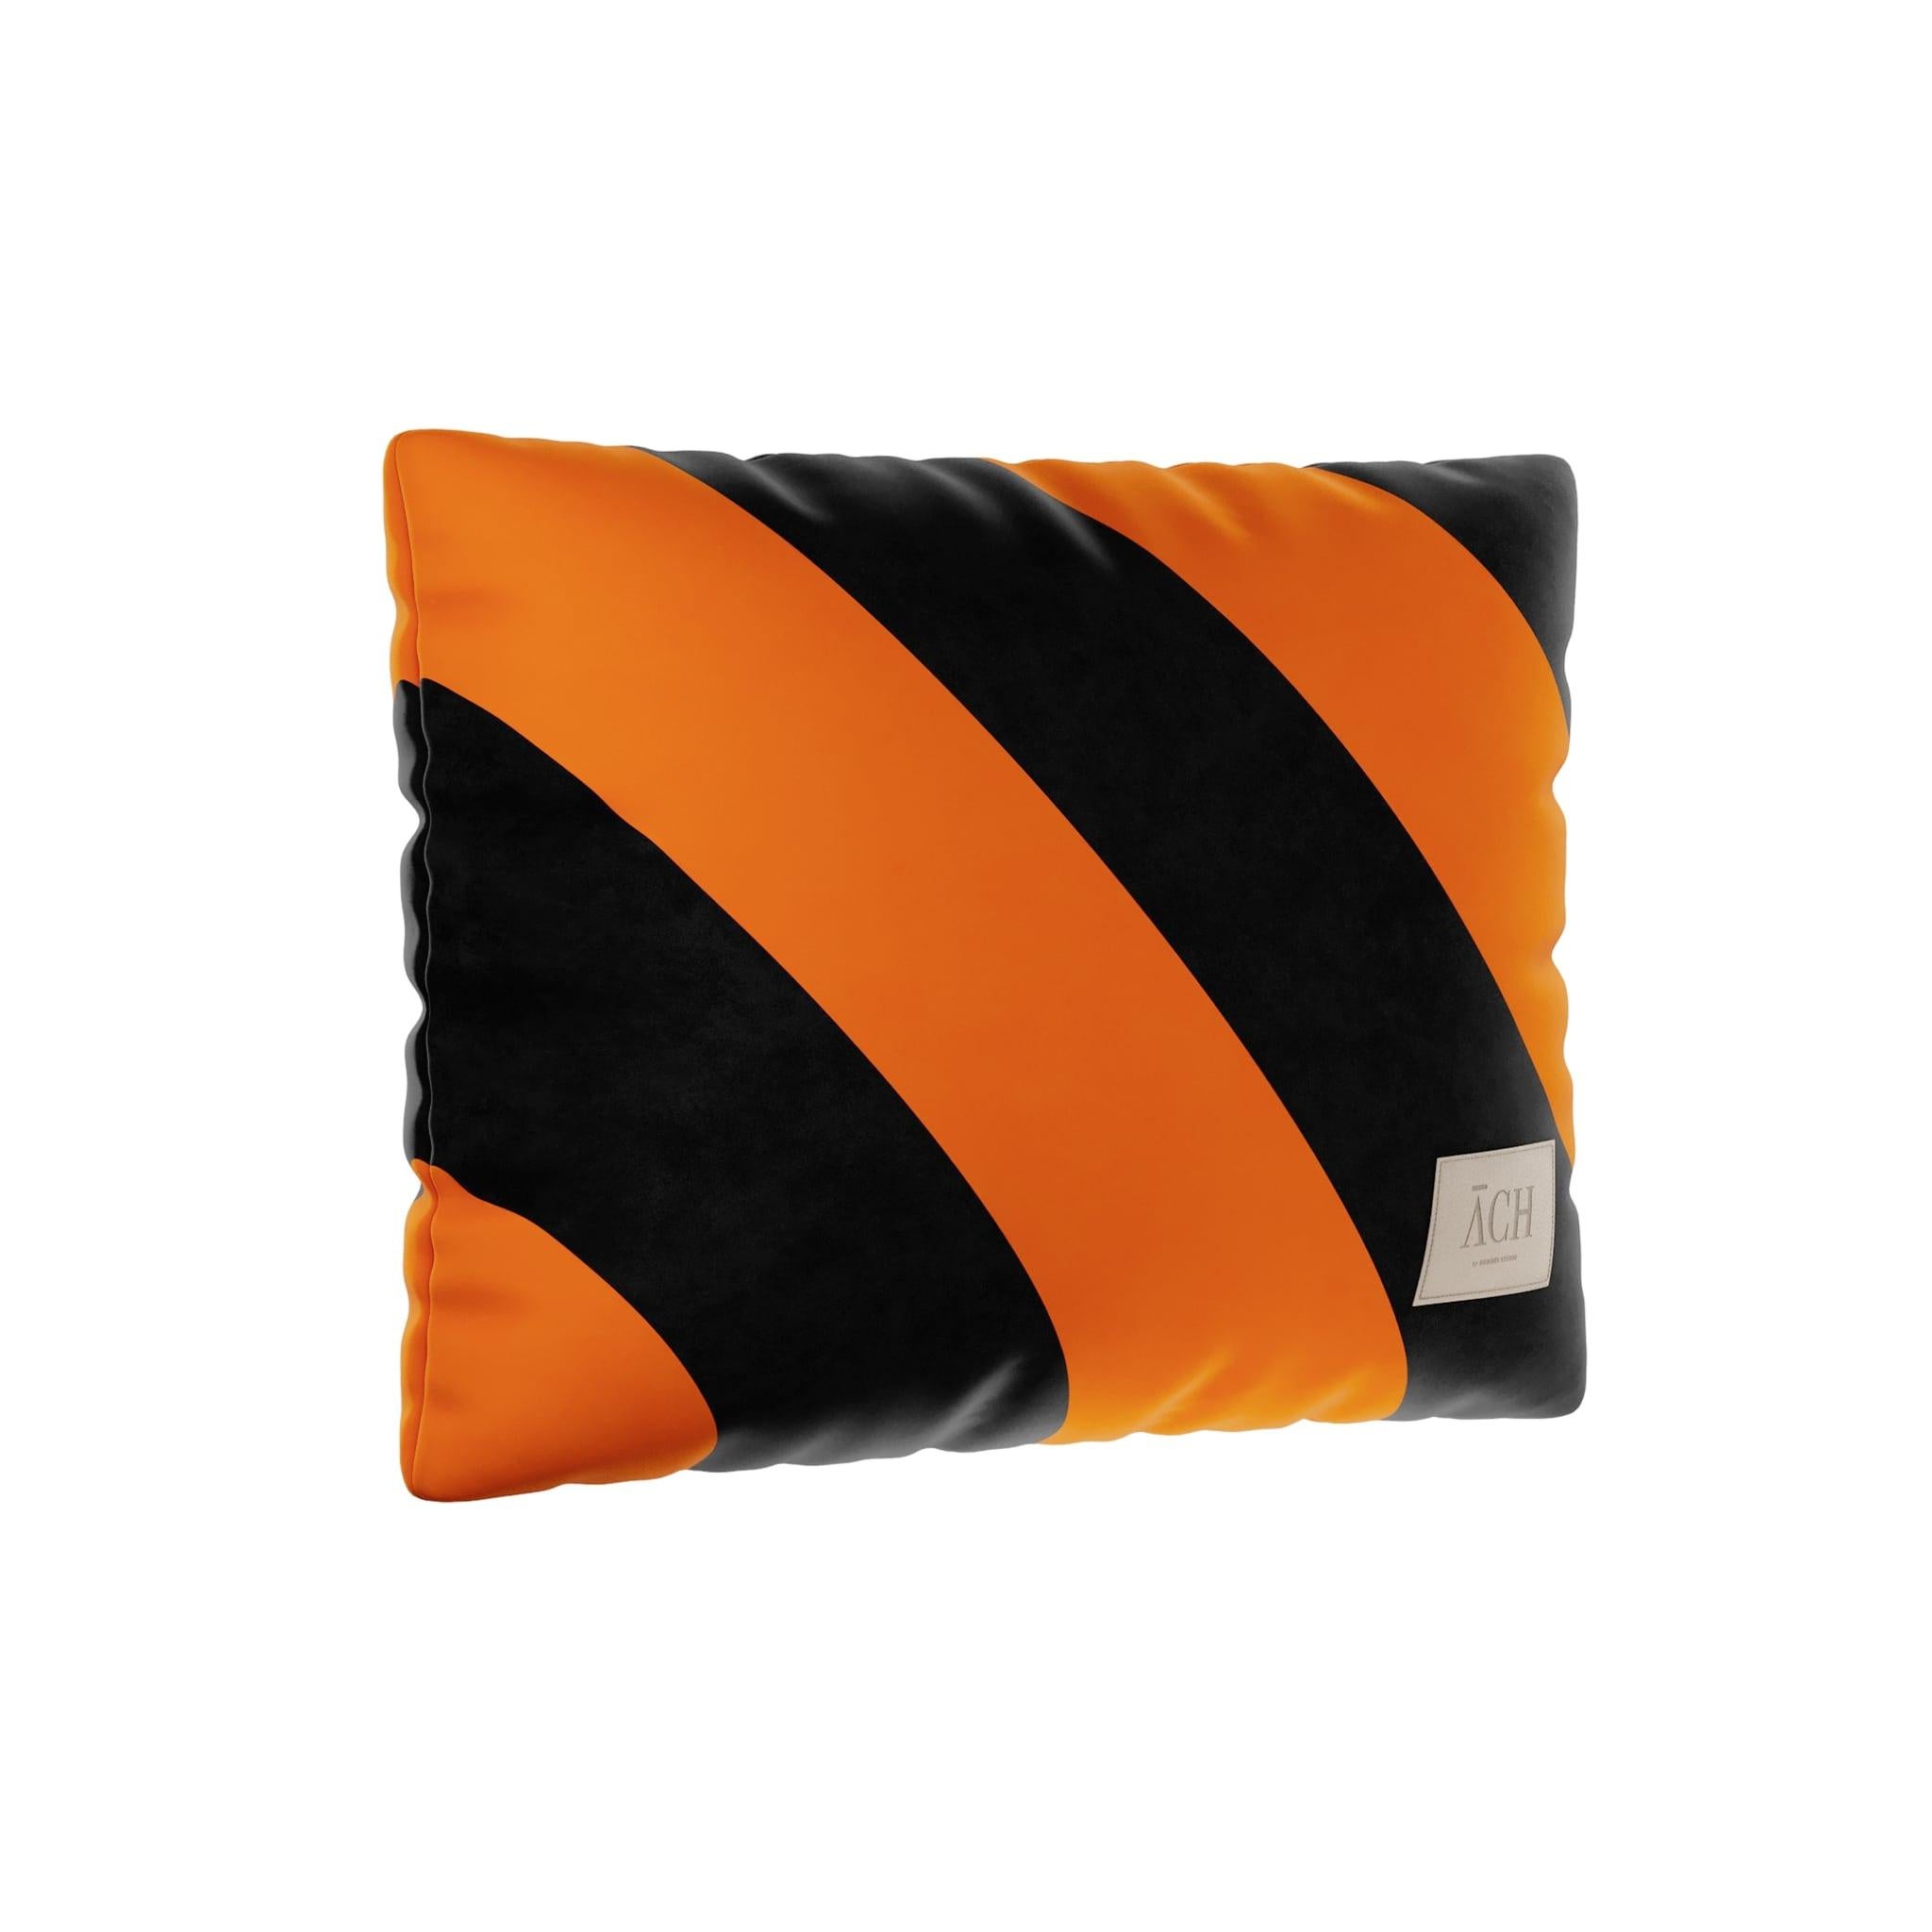 Black Orange Rectangle Pillow is a modern velvet cushion with an eye-catching pattern for a contemporary living room. The throw pillow has a statement color combination of black and orange. Mix the rectangle with solid colors cushions or pop one to